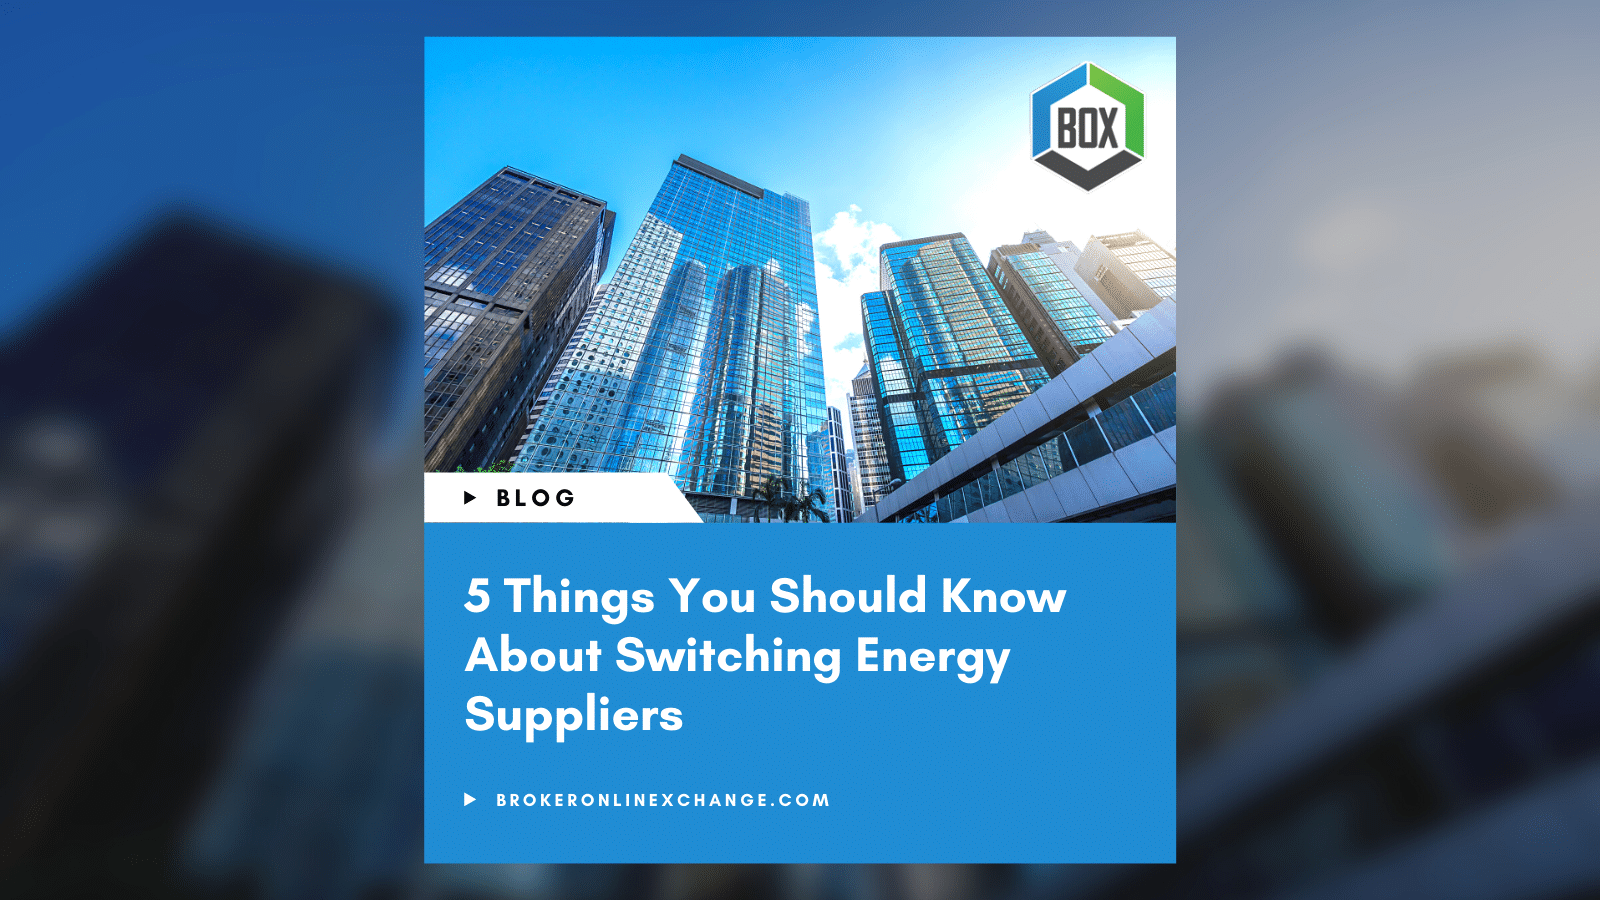 5 Things You Should Know About Switching Energy Suppliers